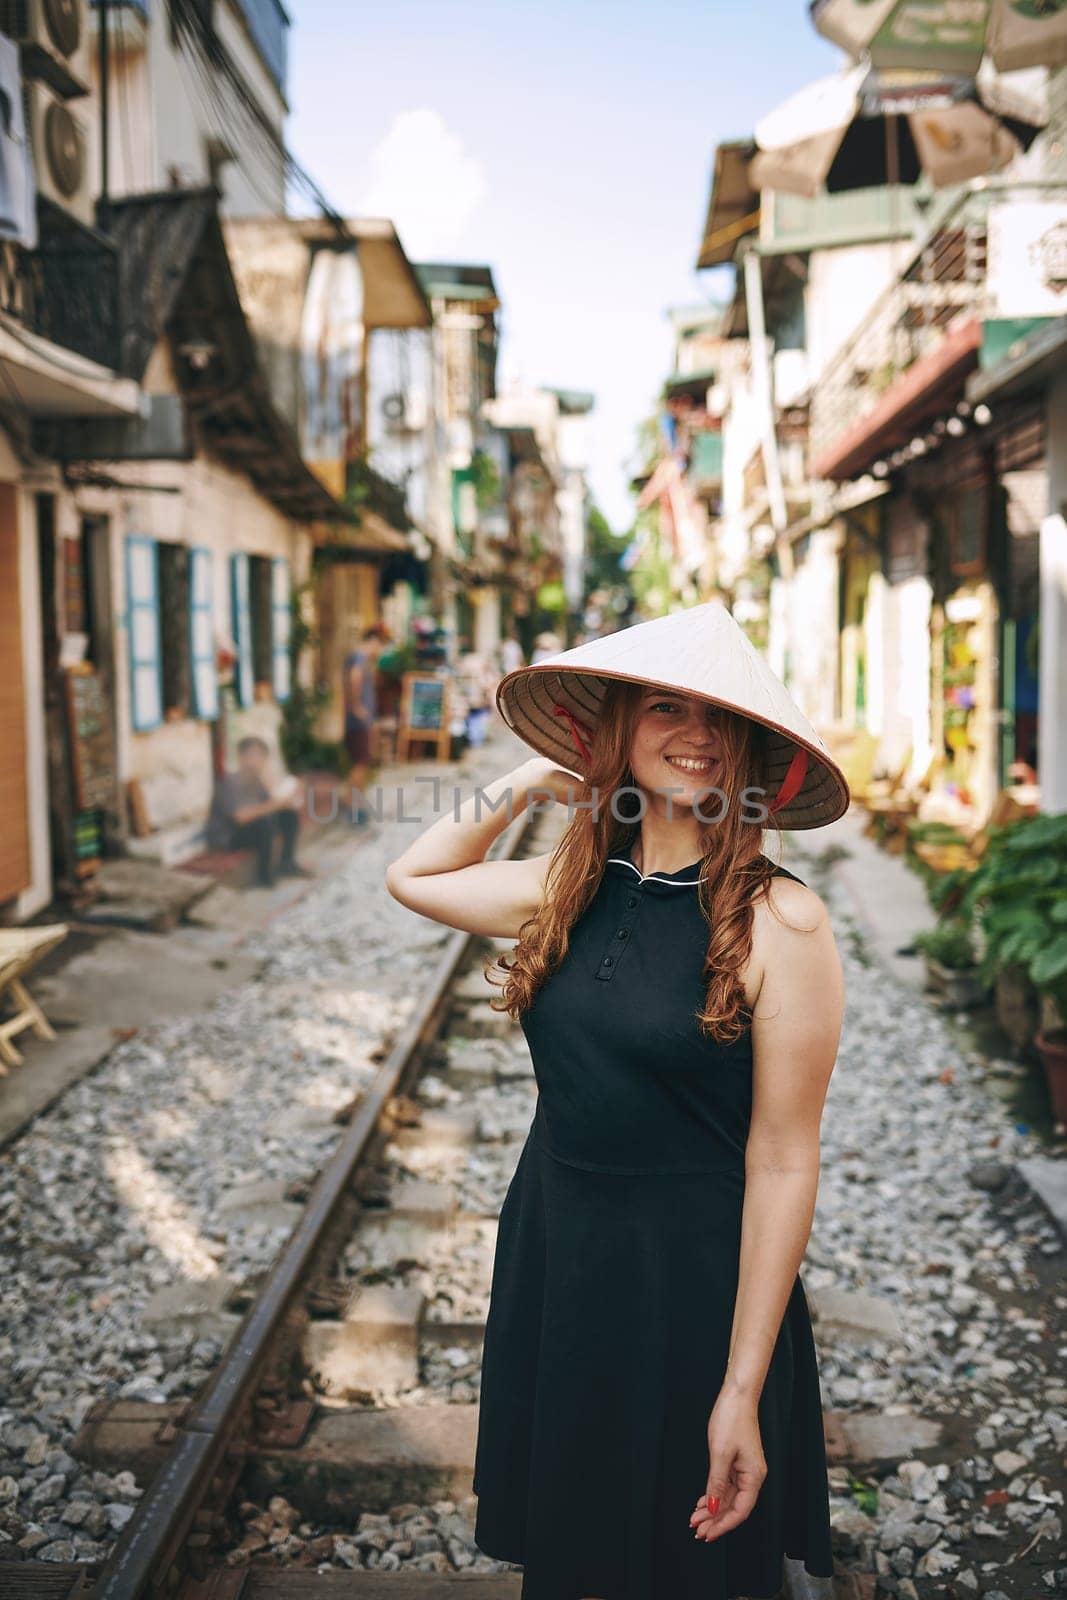 Travel to seek adventure and feel alive. a young woman wearing a conical hat while exploring a foreign city. by YuriArcurs